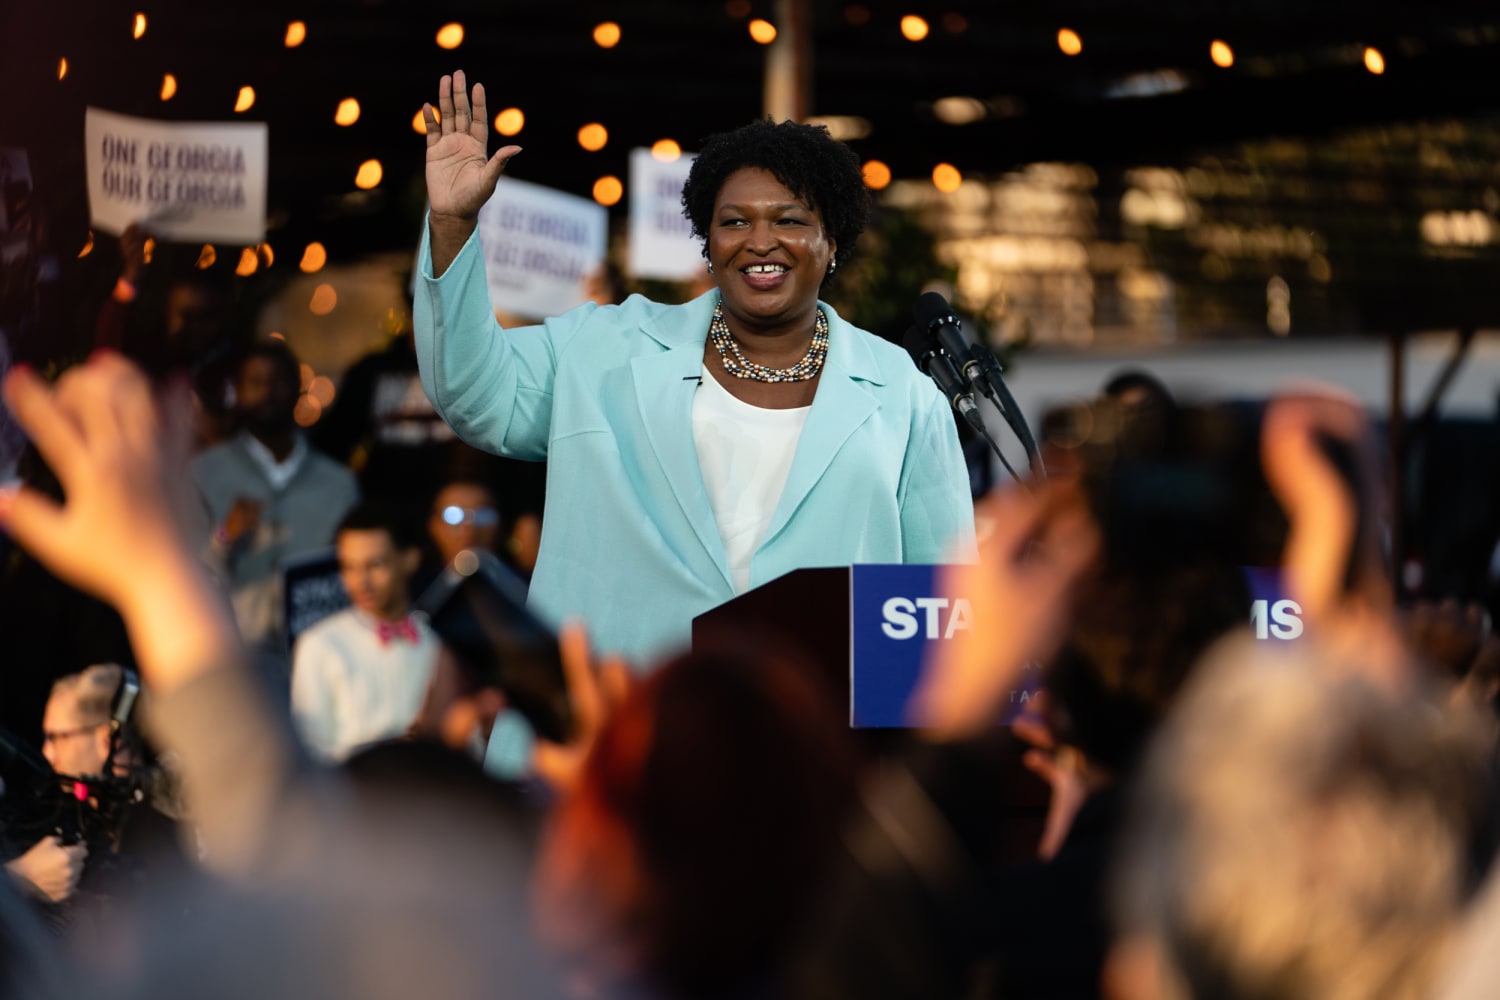 Abrams says Georgia is ‘worst state’ to live in, citing health care, incarceration rates